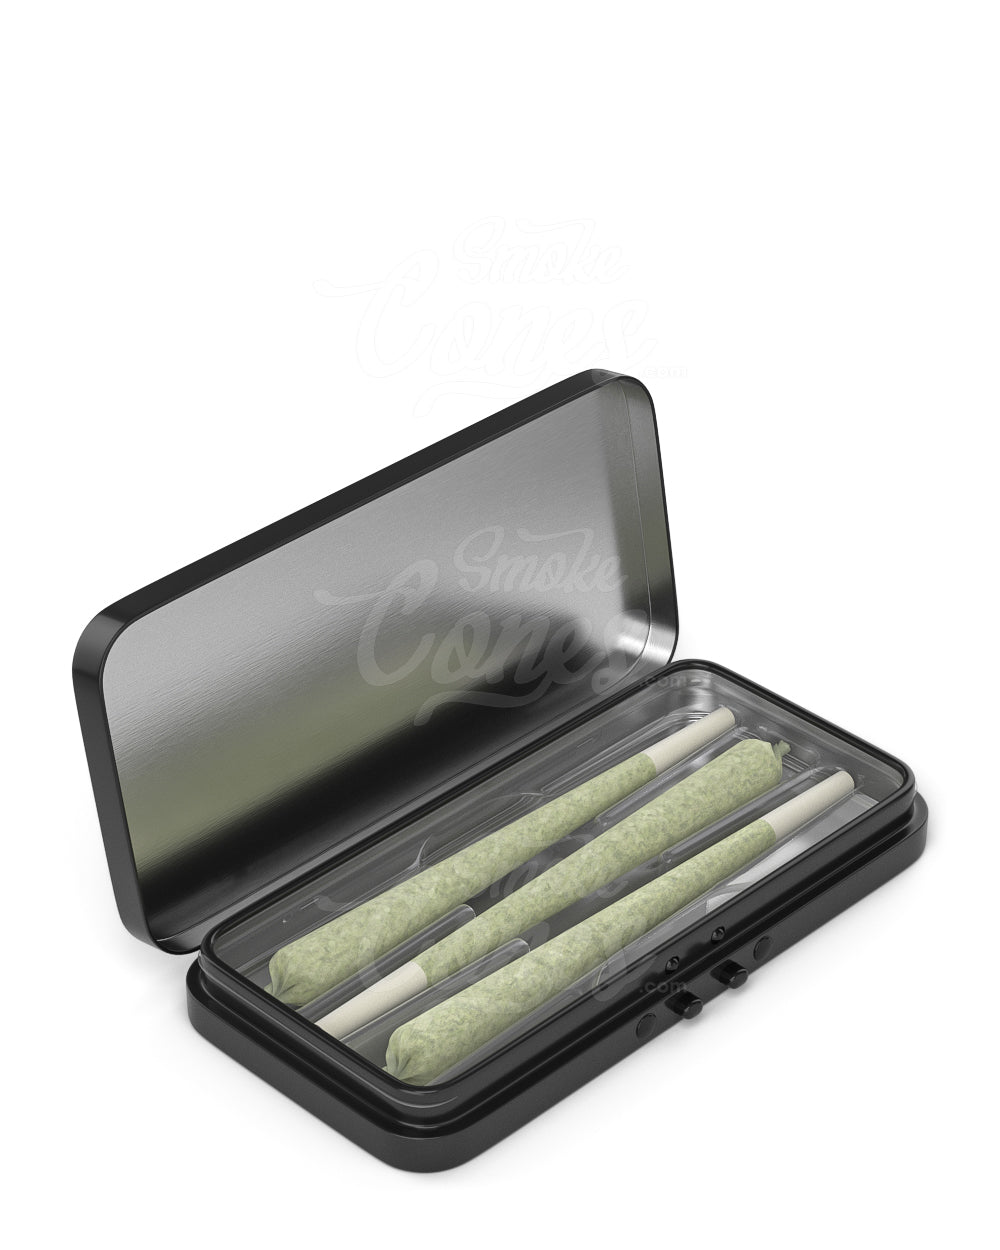 Clear Edible & Joint Box Plastic Insert Tray for 3 King Size 109mm Pre Rolled Cones 100/Box - 8